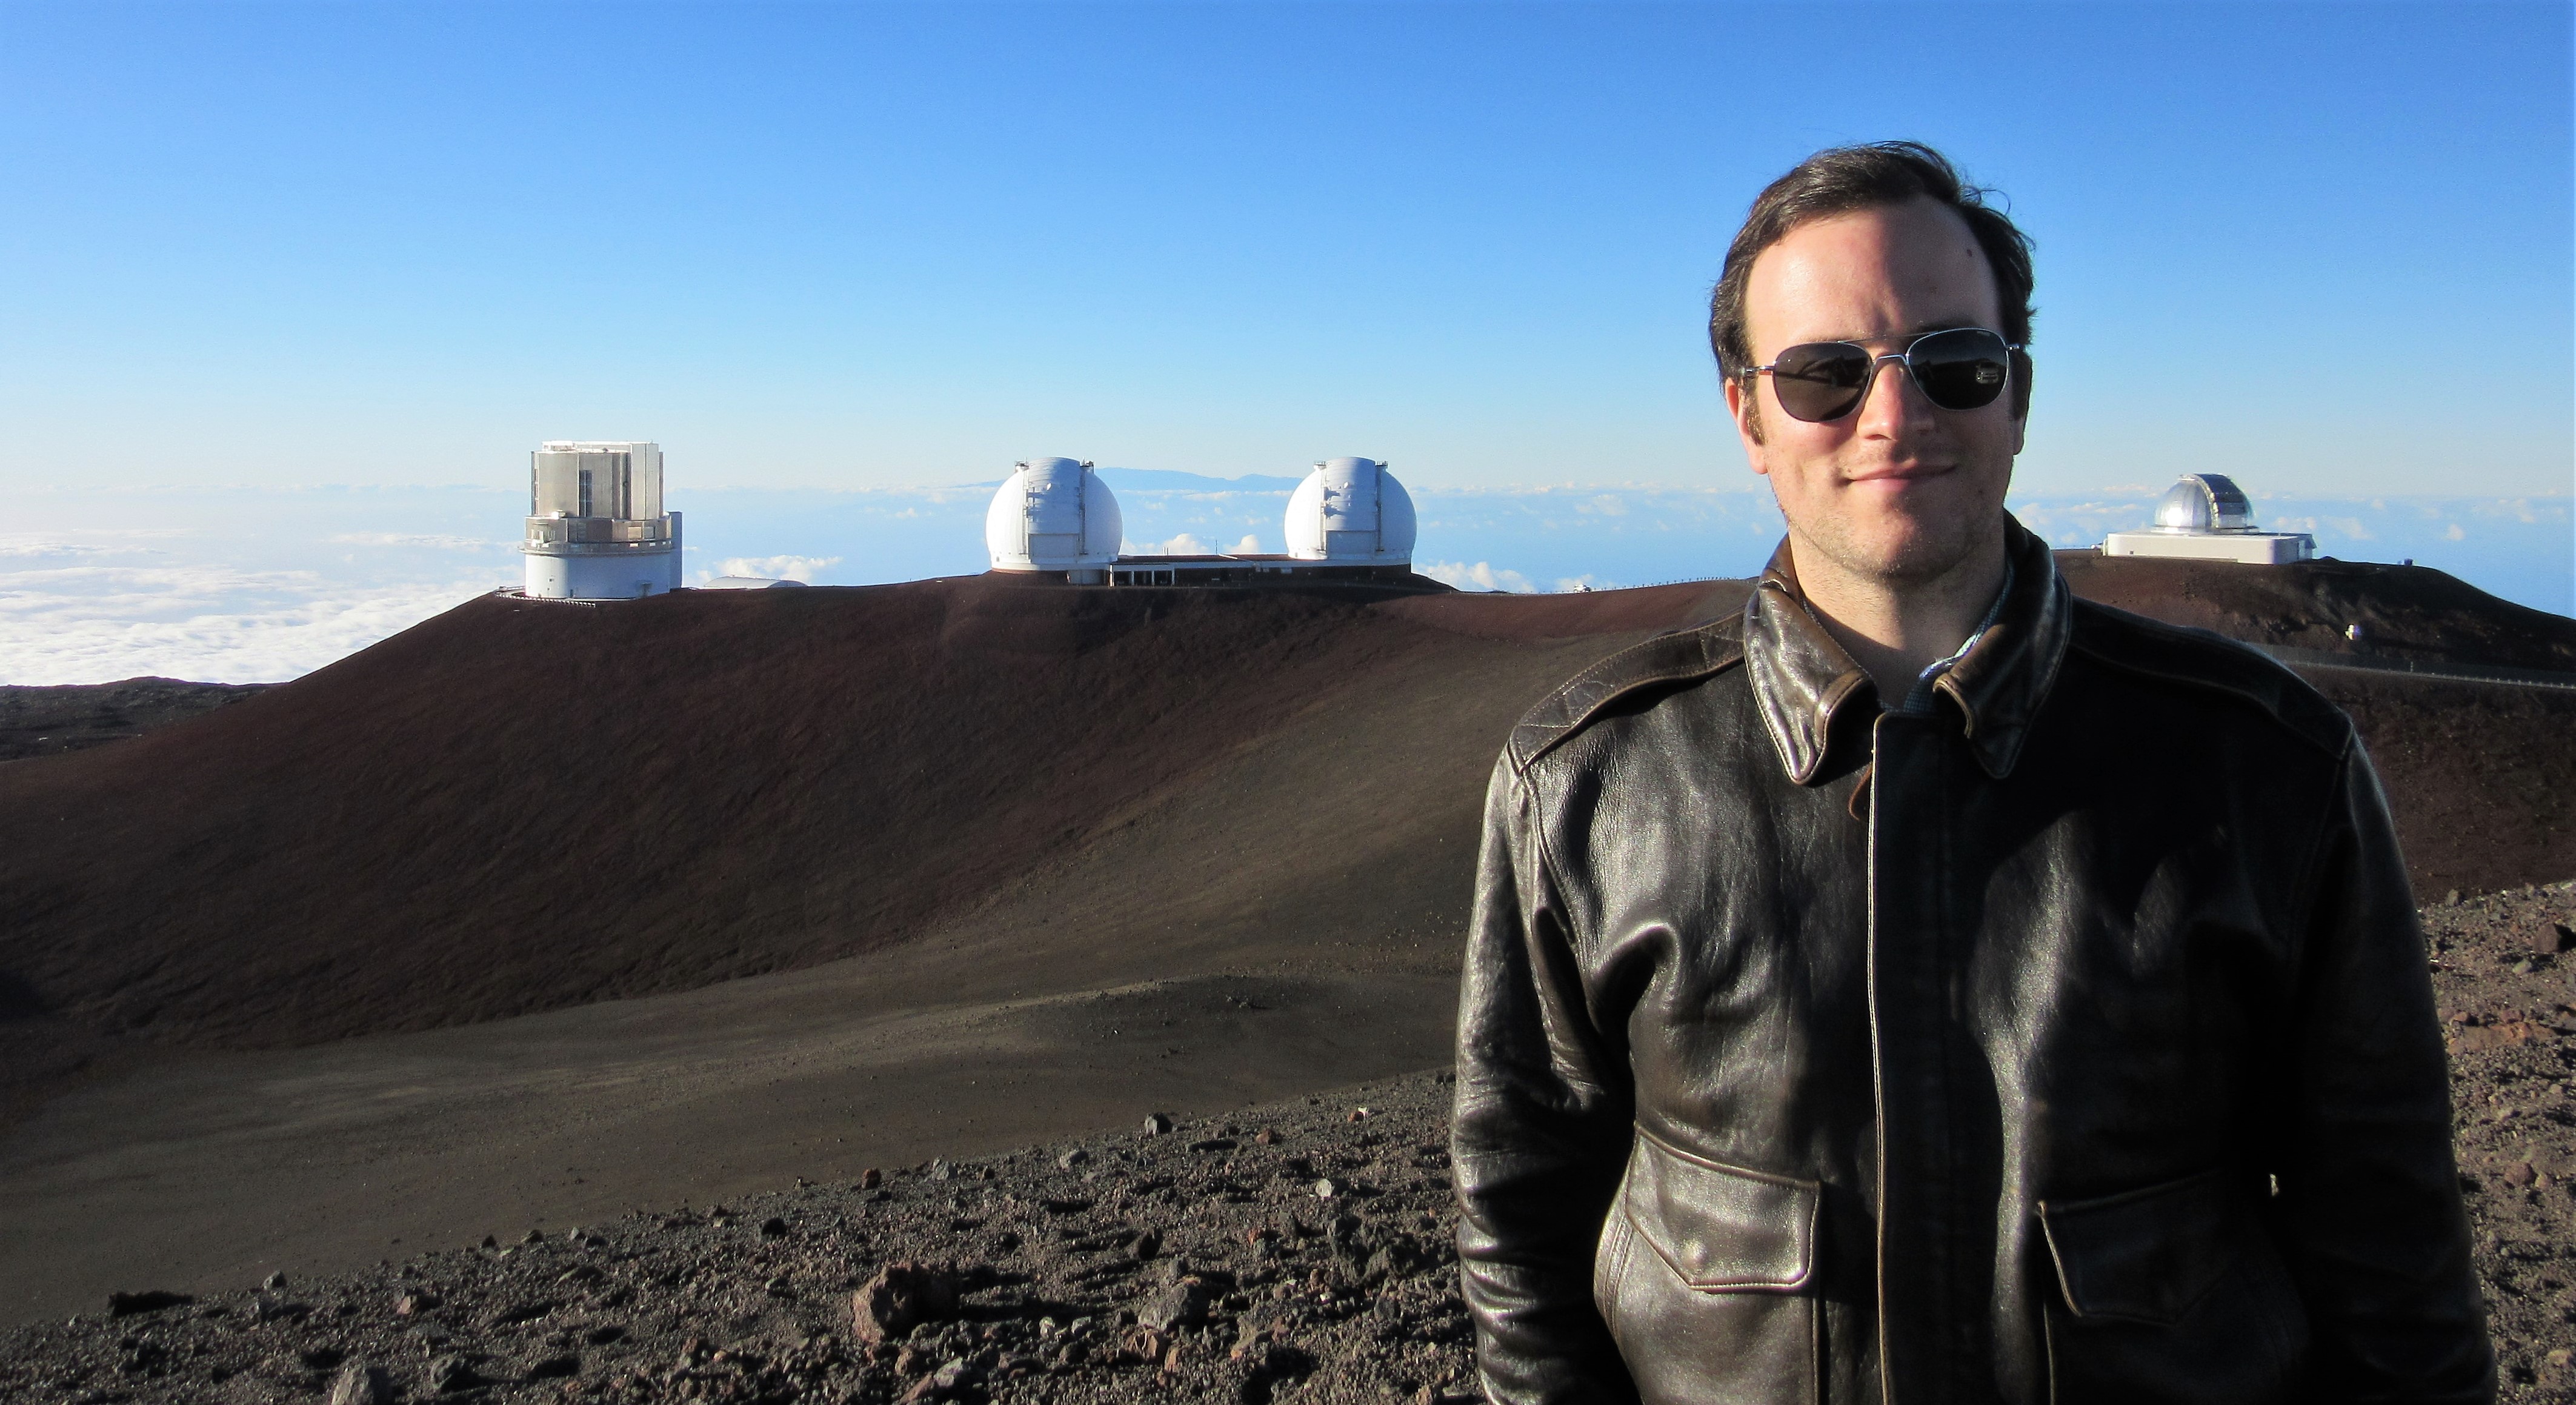 Thomas Beatty, PhD Post-doctoral Fellow, Pennsylvania State University Department of Astronomy and Astrophysics Center for Exoplanets and Habitable Worlds